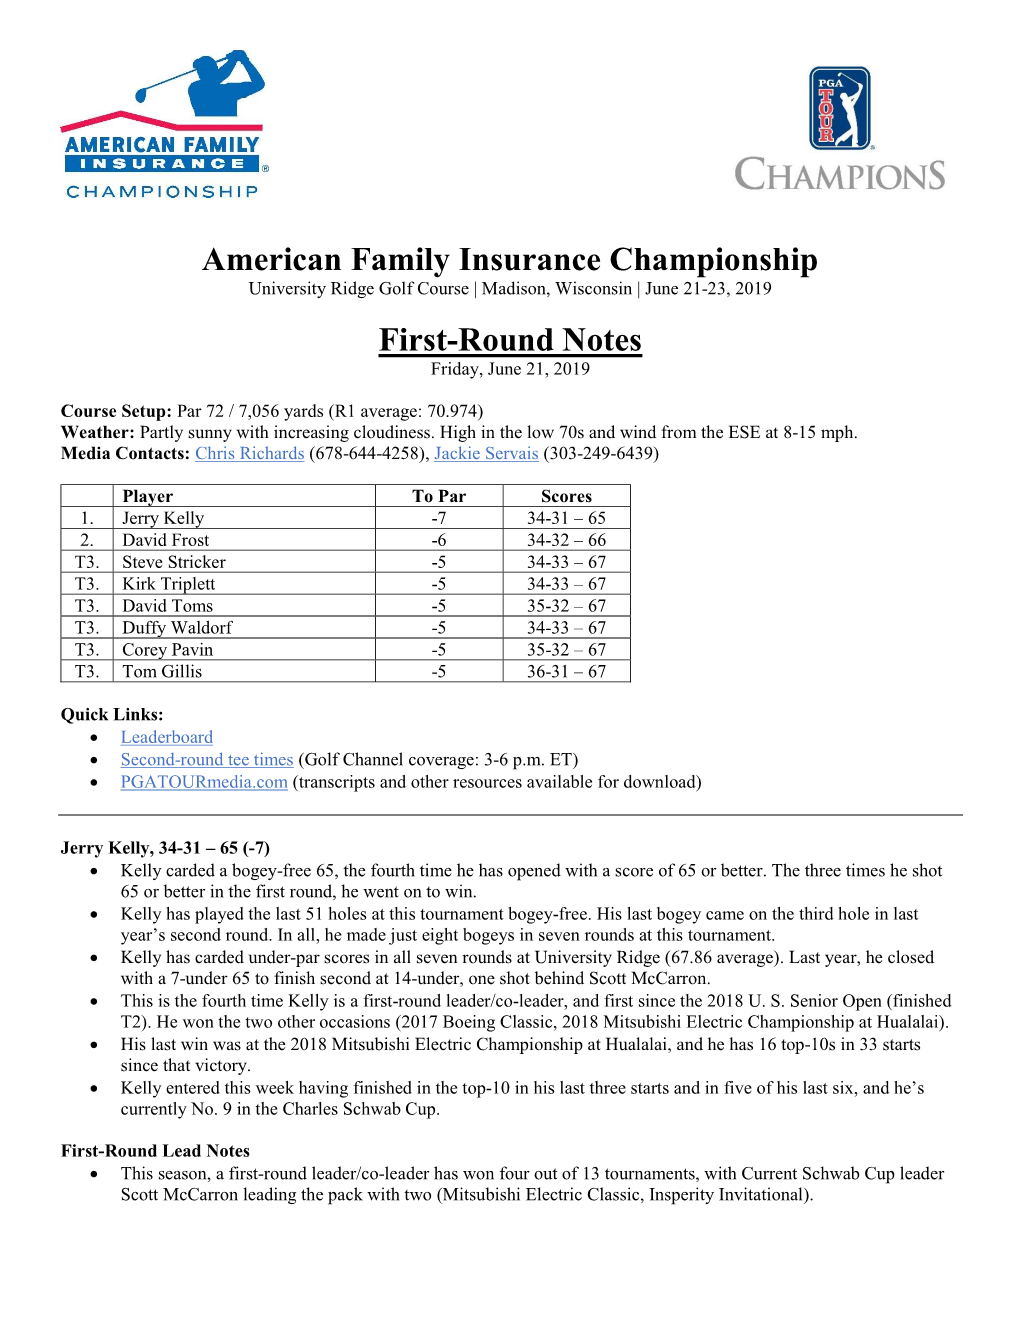 American Family Insurance Championship First